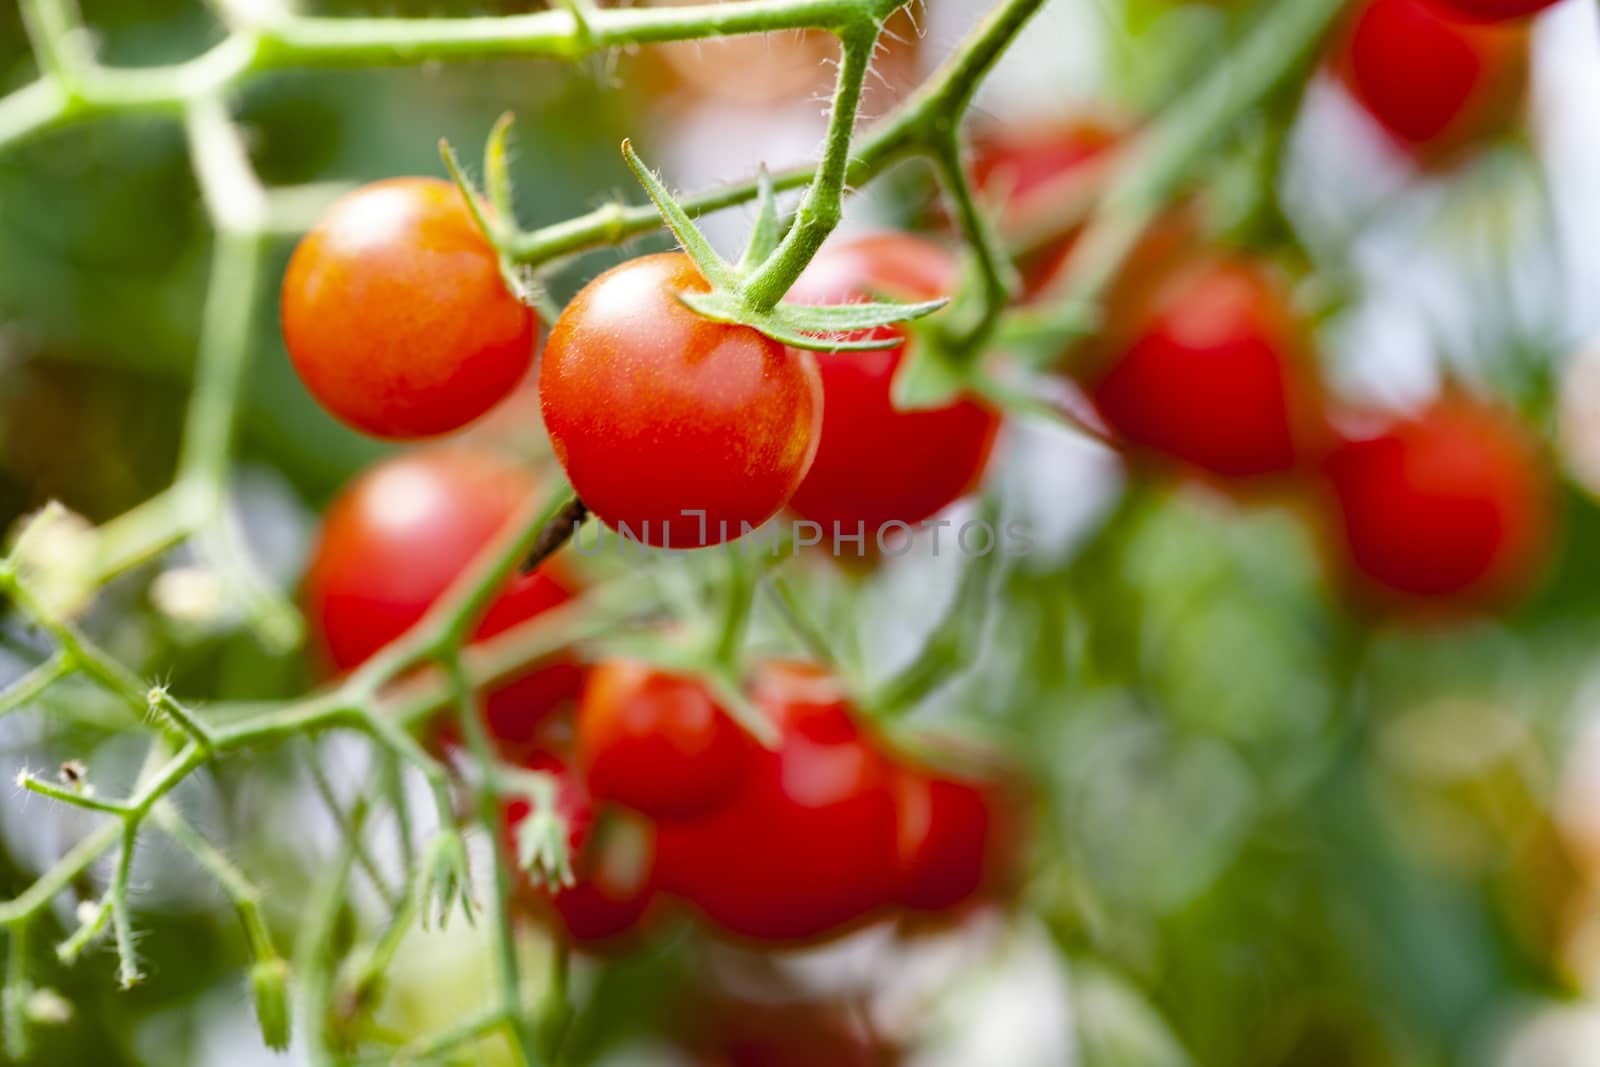 Organic Red Cherry Tomatoes Pair on a Branch